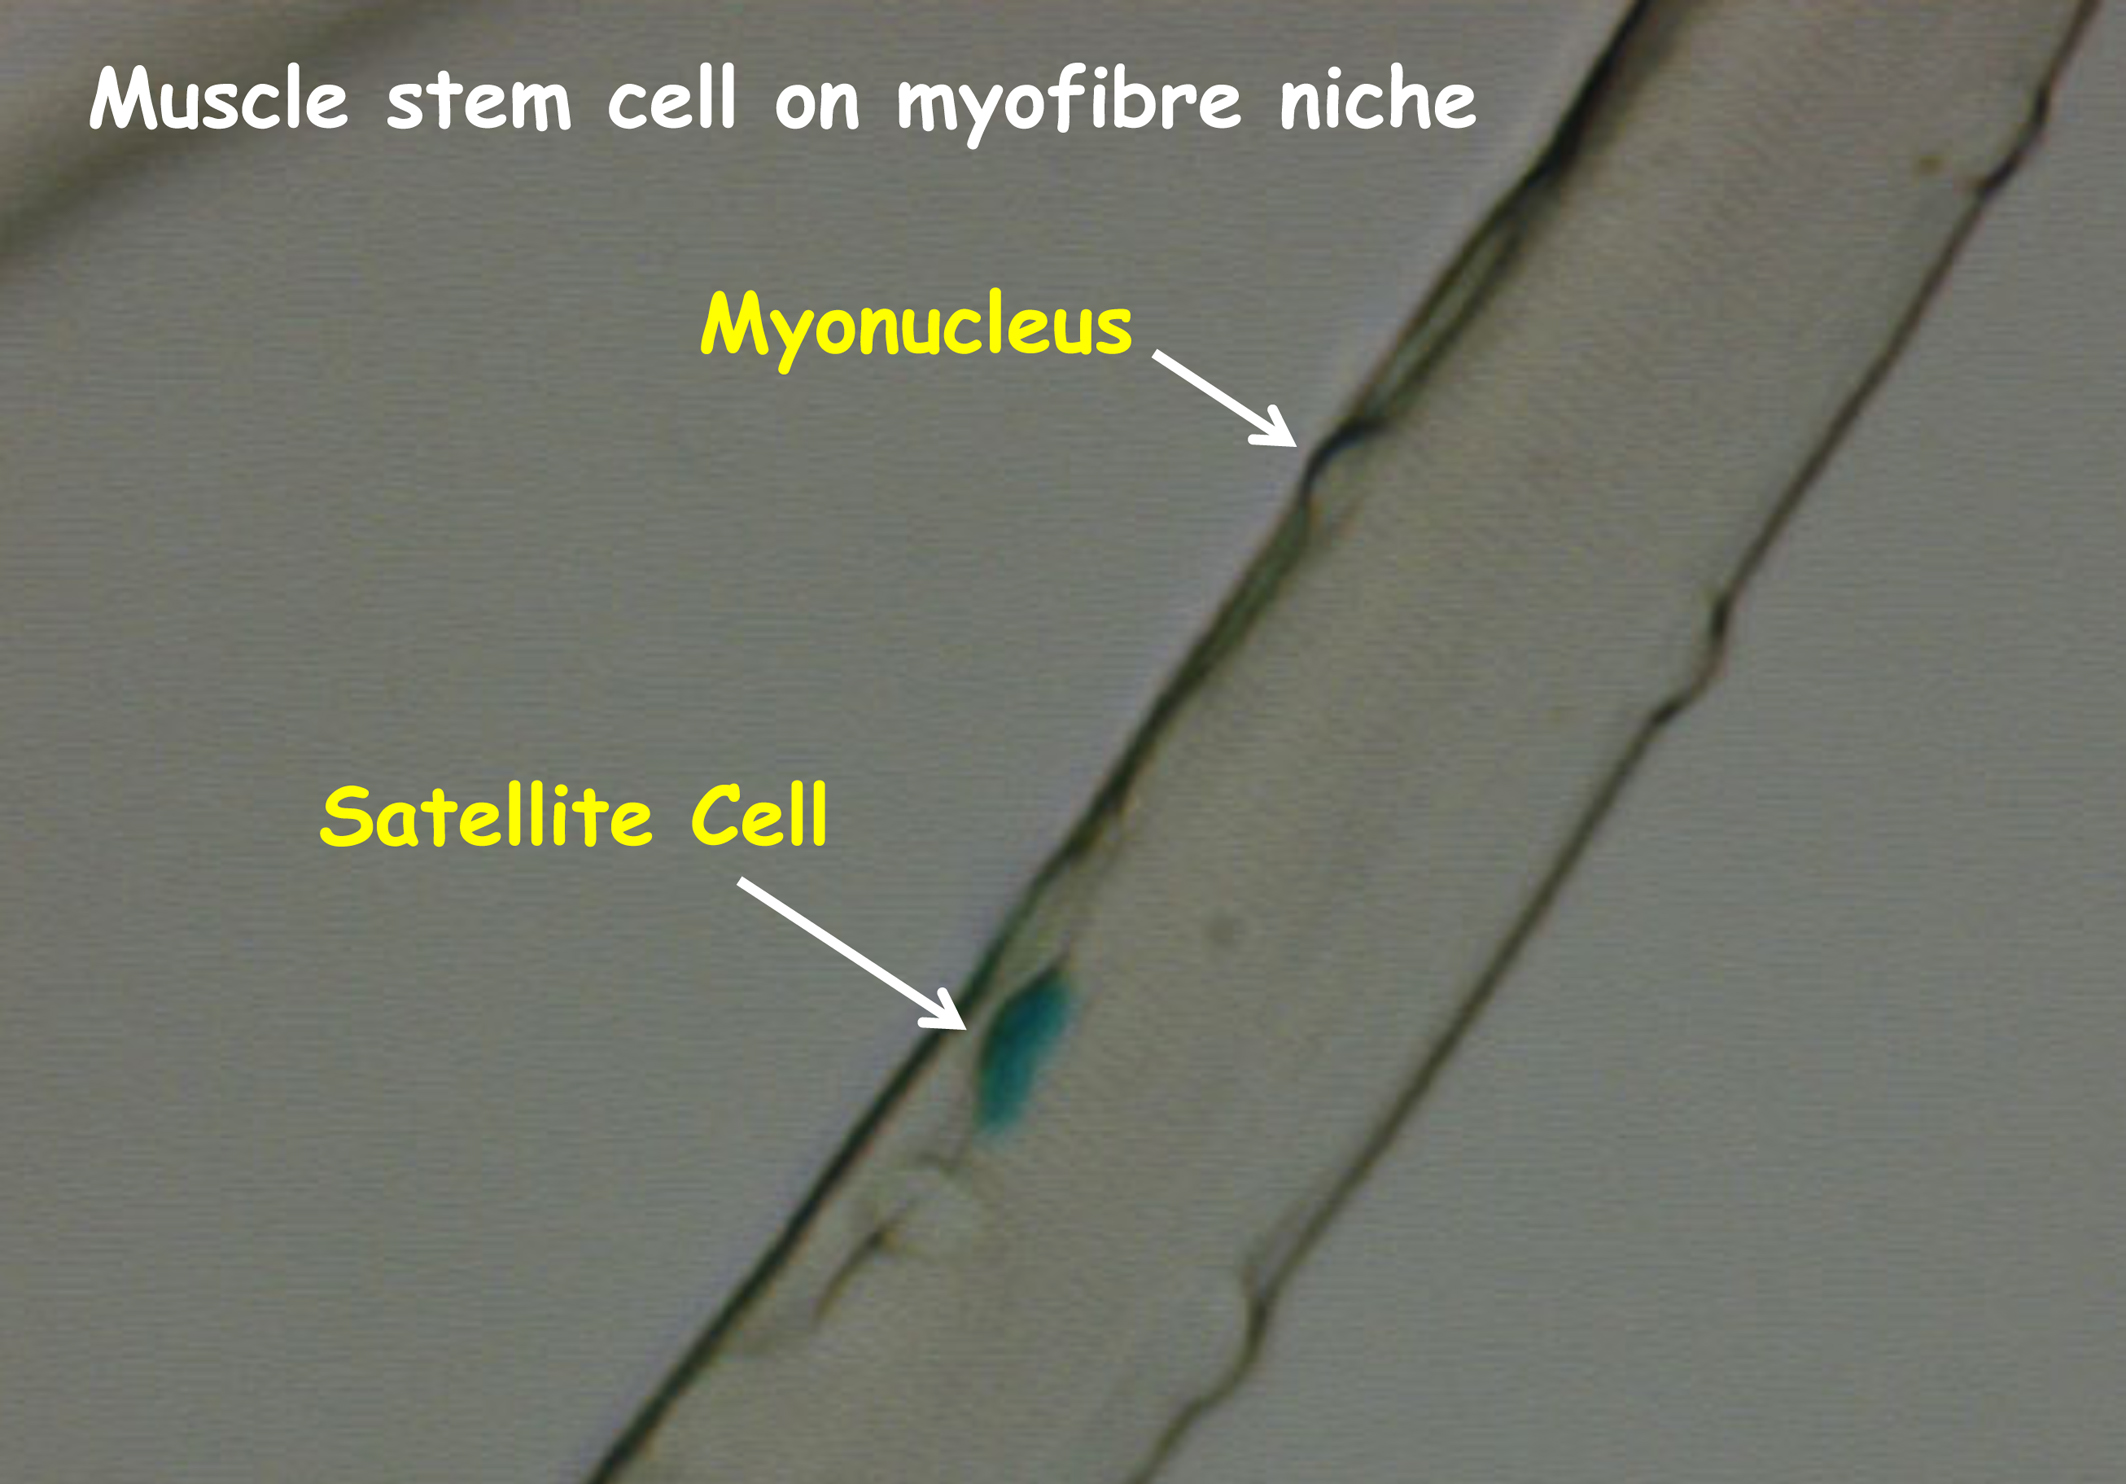 Satellite cell on muscle fibre